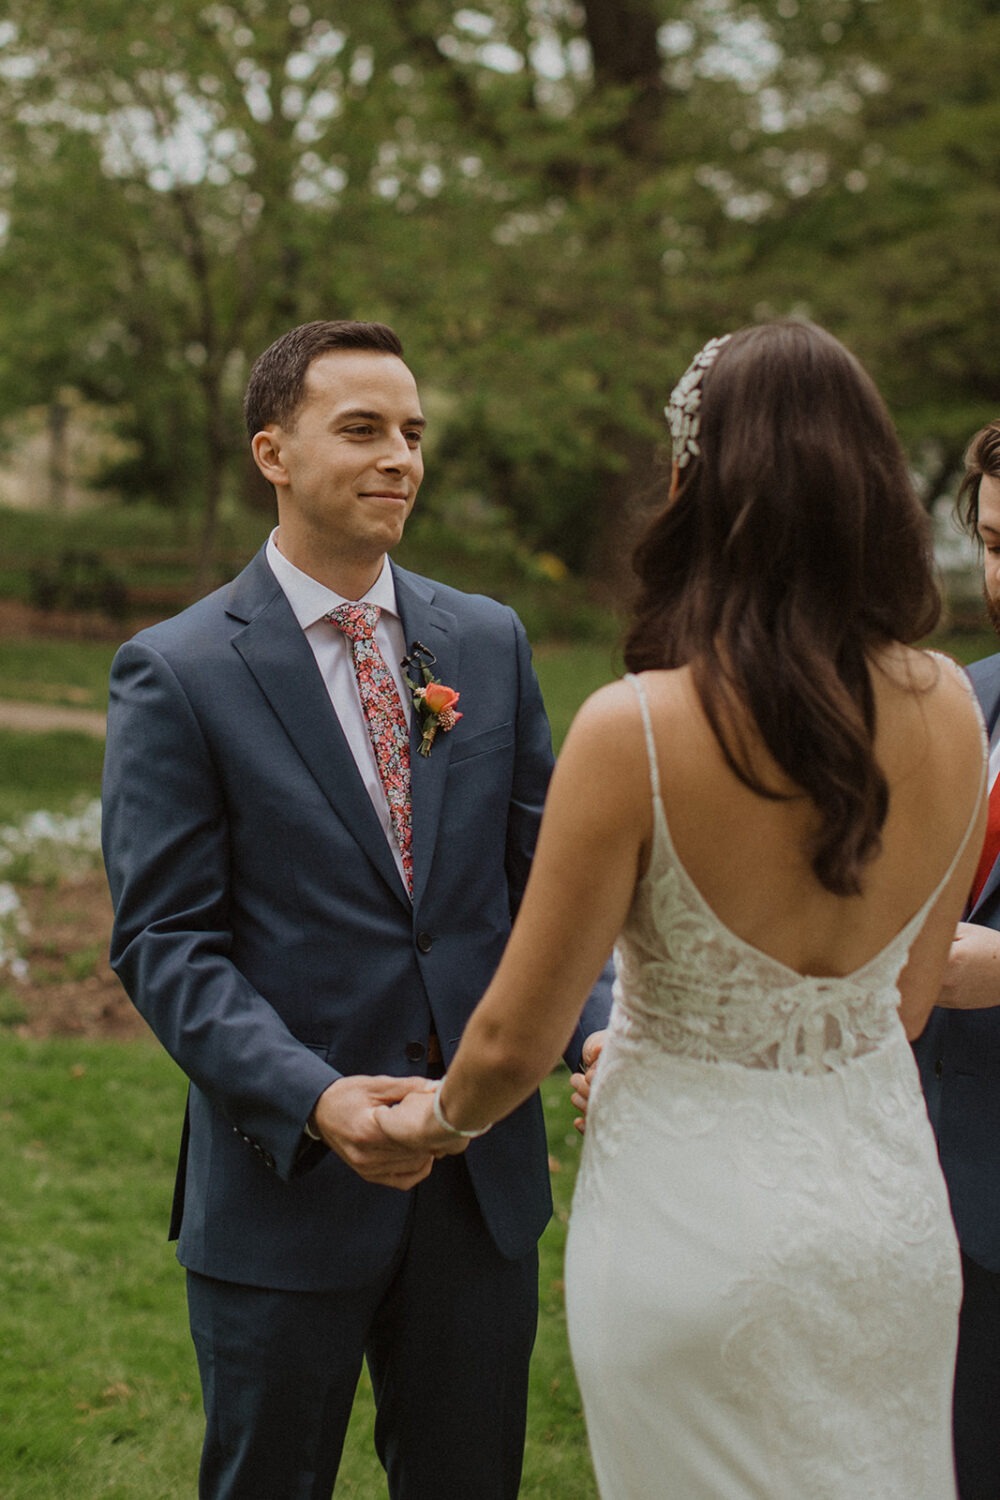 couple holds hands at park outdoor ceremony